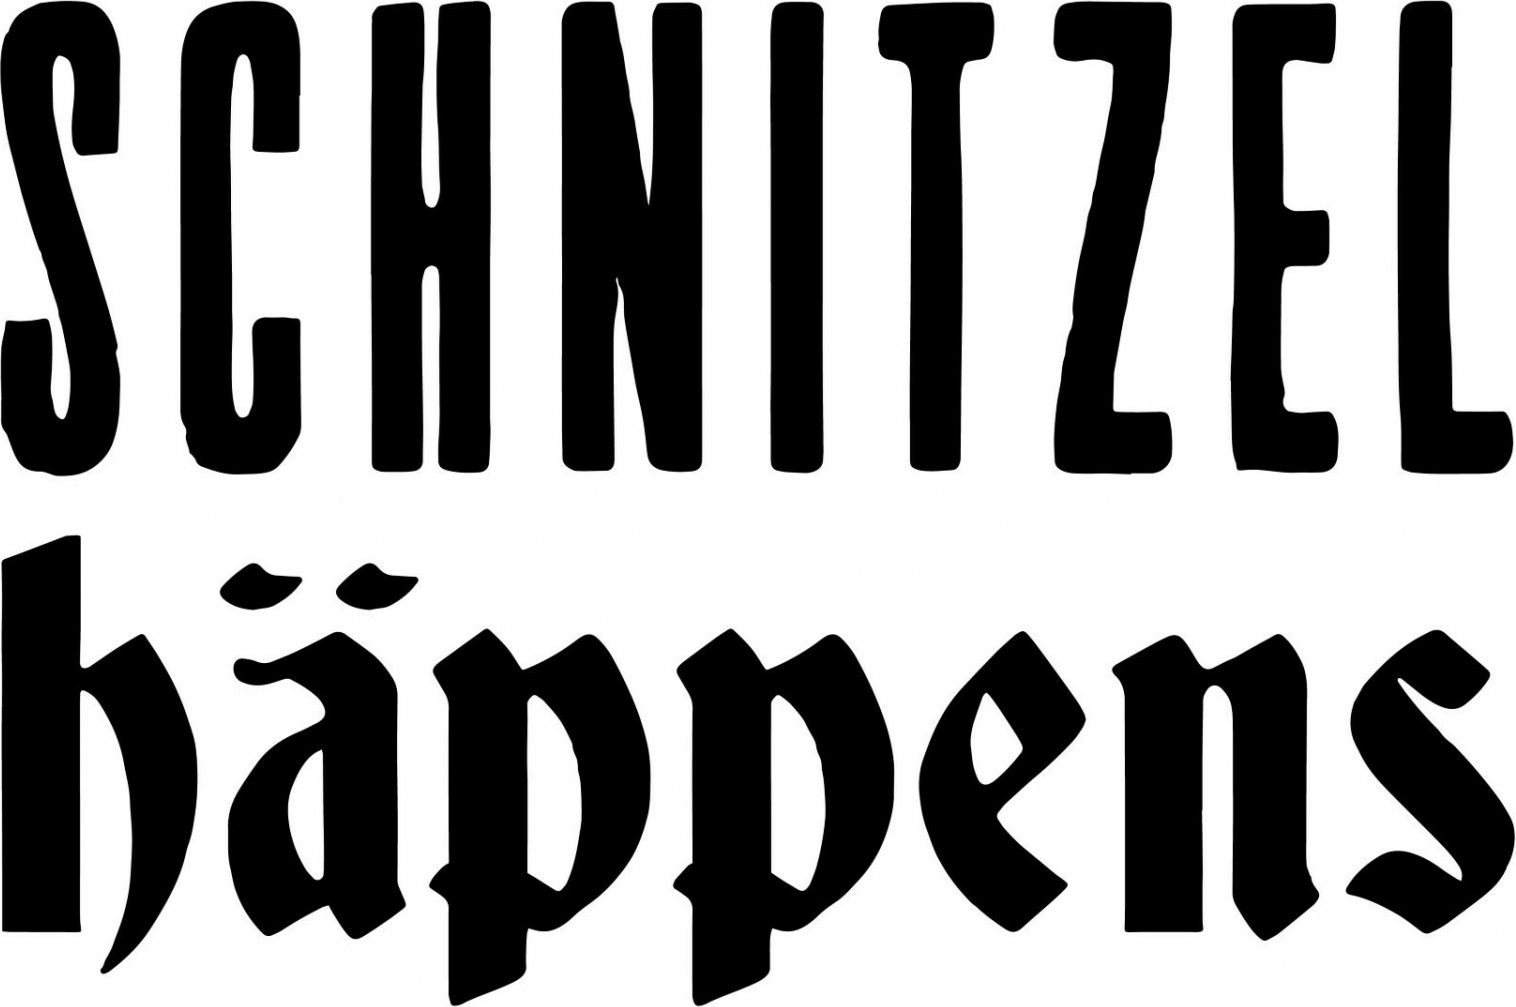 urgent please help me, what font are schnitzel and happens?